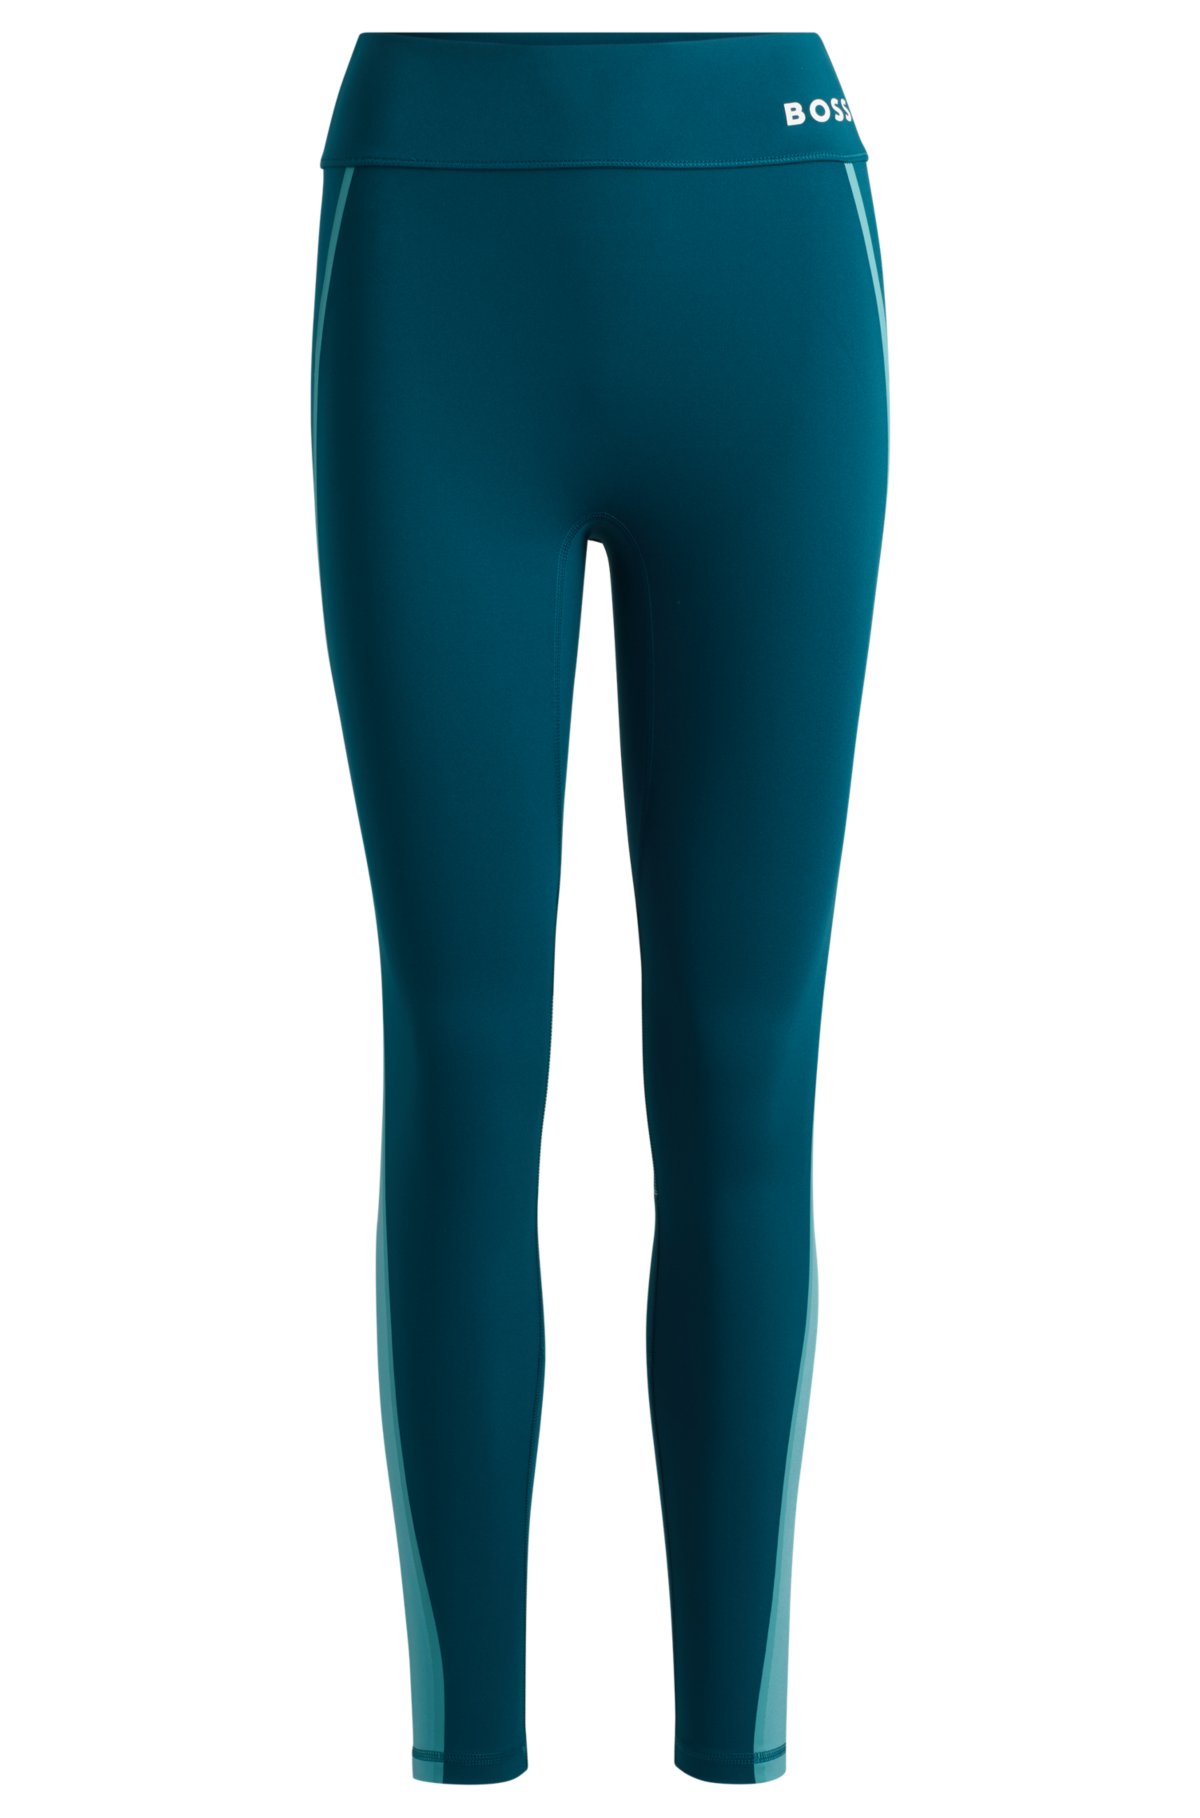 Slim-fit leggings with side stripes and logo detail, Petrol